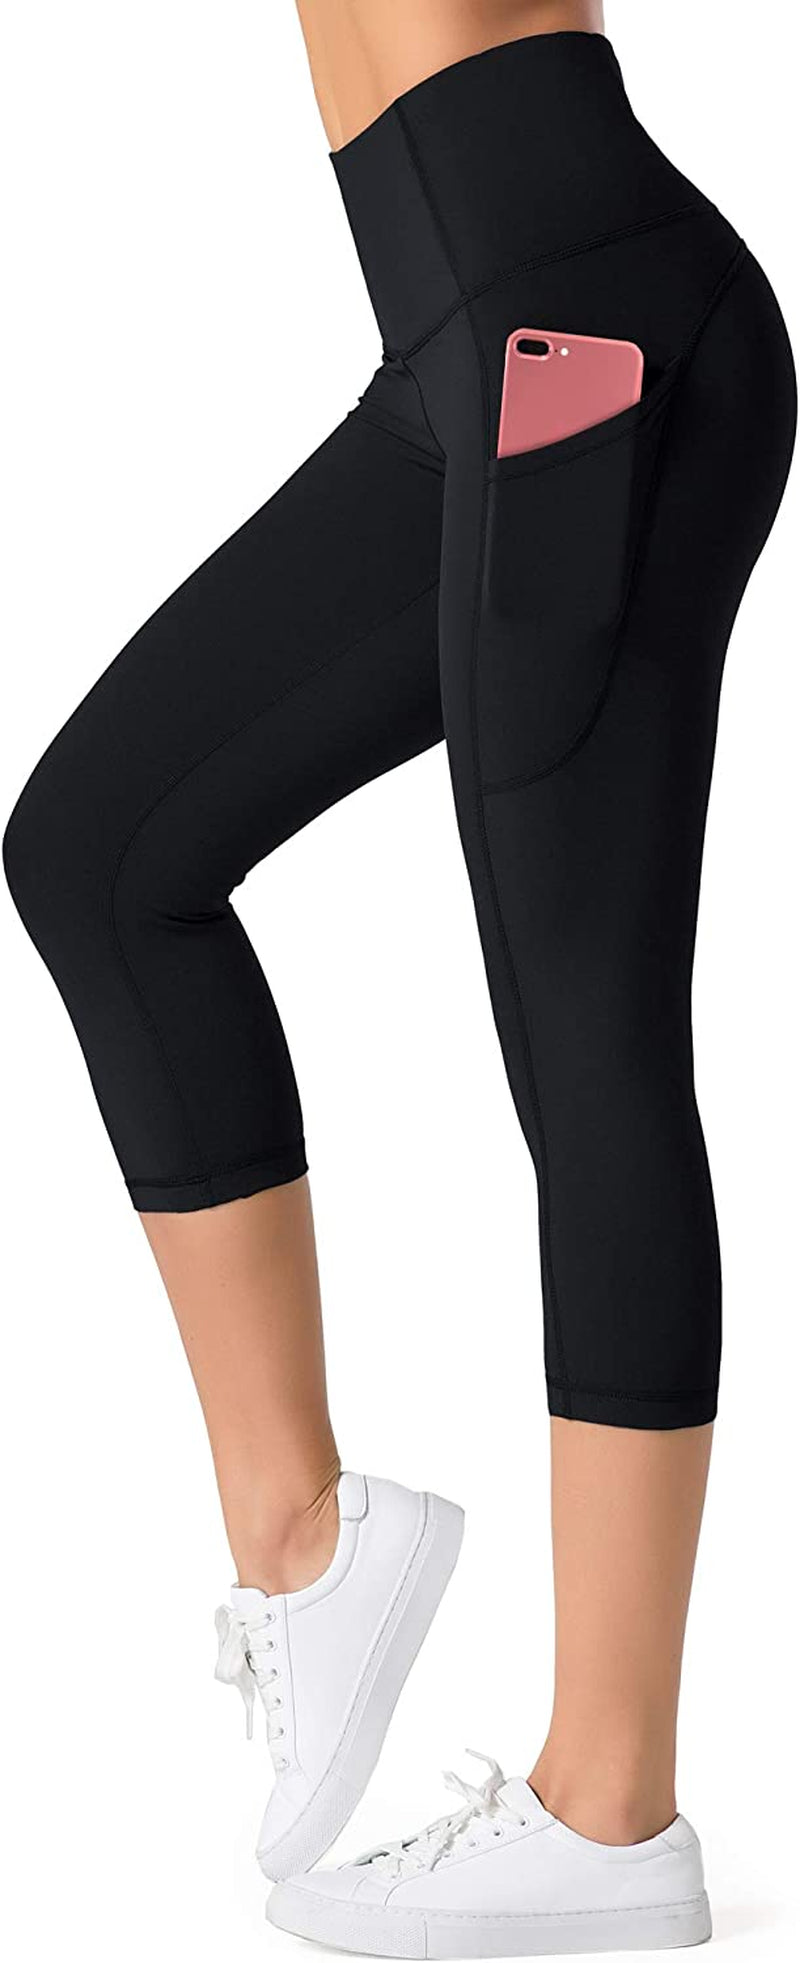 Dragon Fit Compression Yoga Pants with Inner Pockets in High Waist